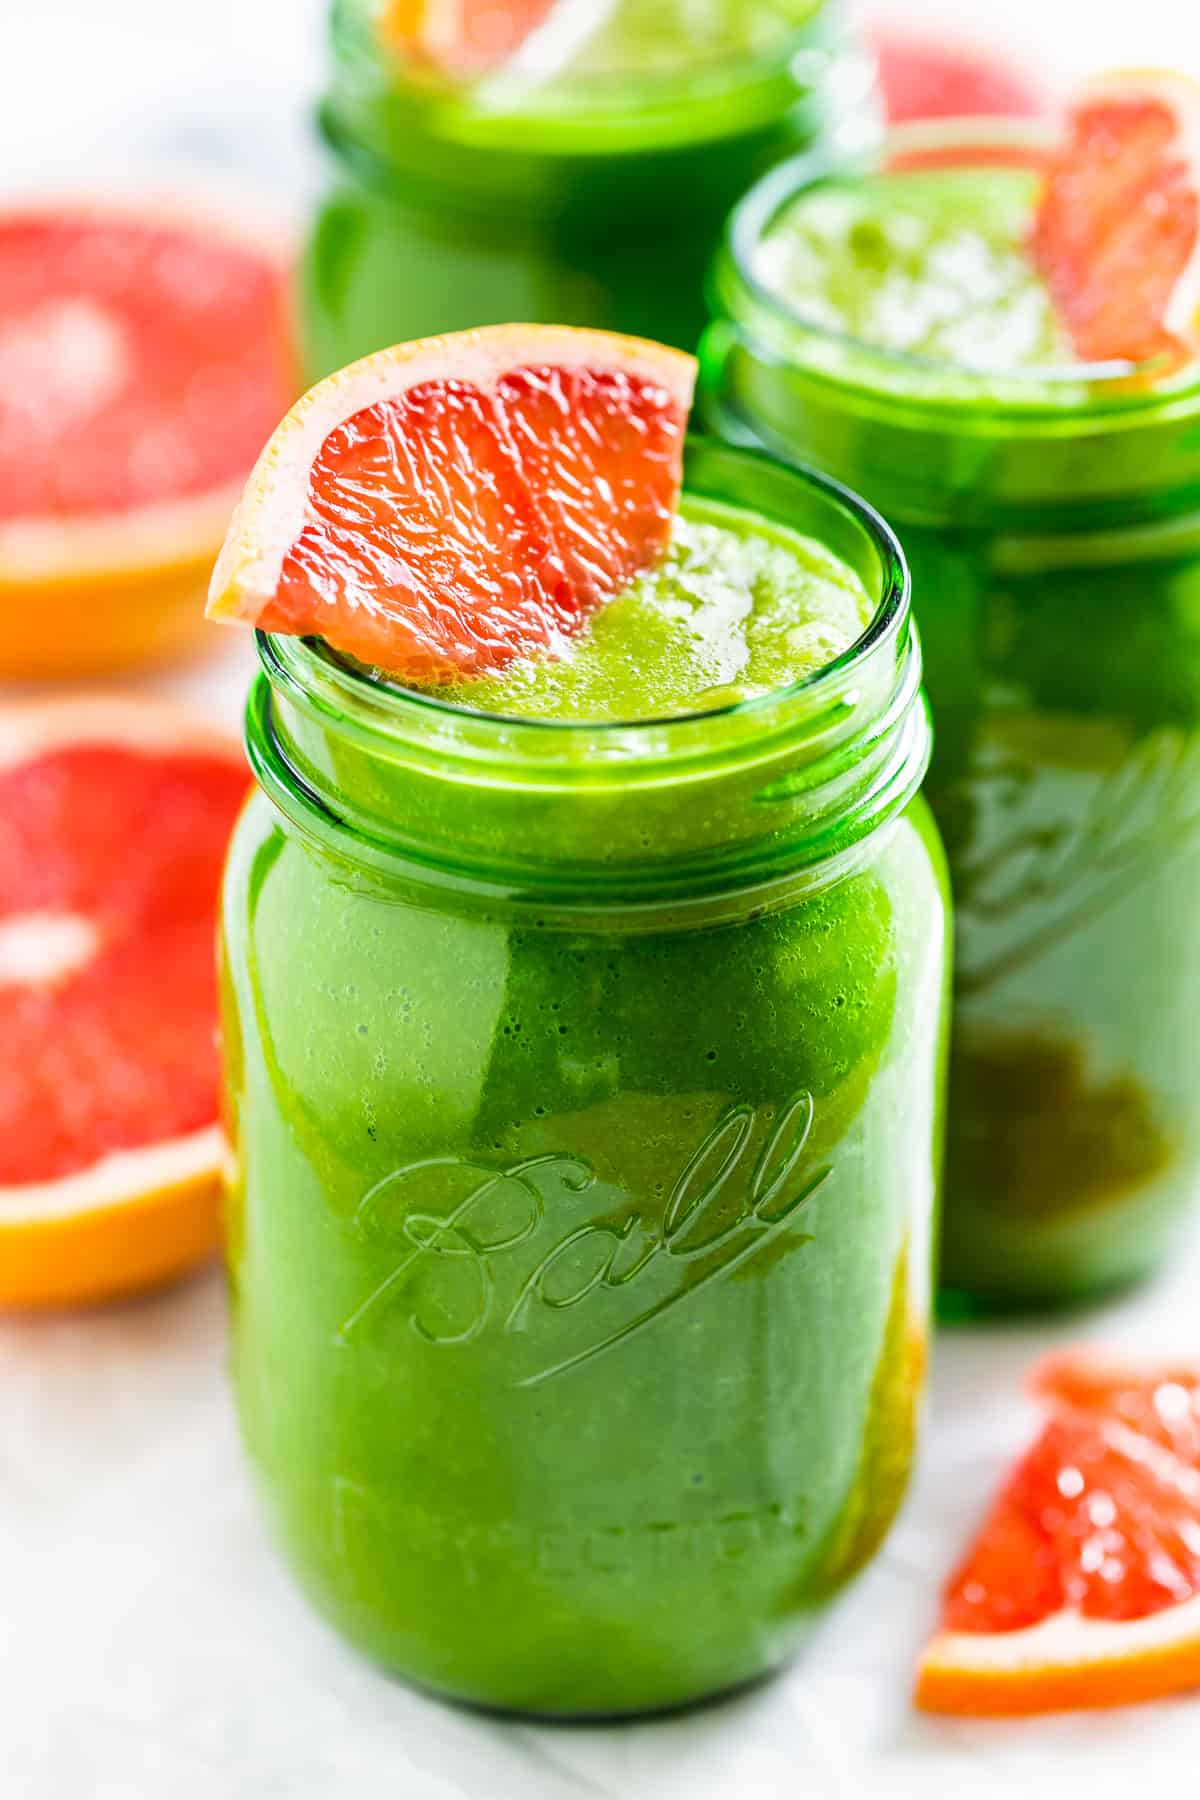 Three green glass jars of Grapefruit Green Smoothie with halved grapefruits on the side.